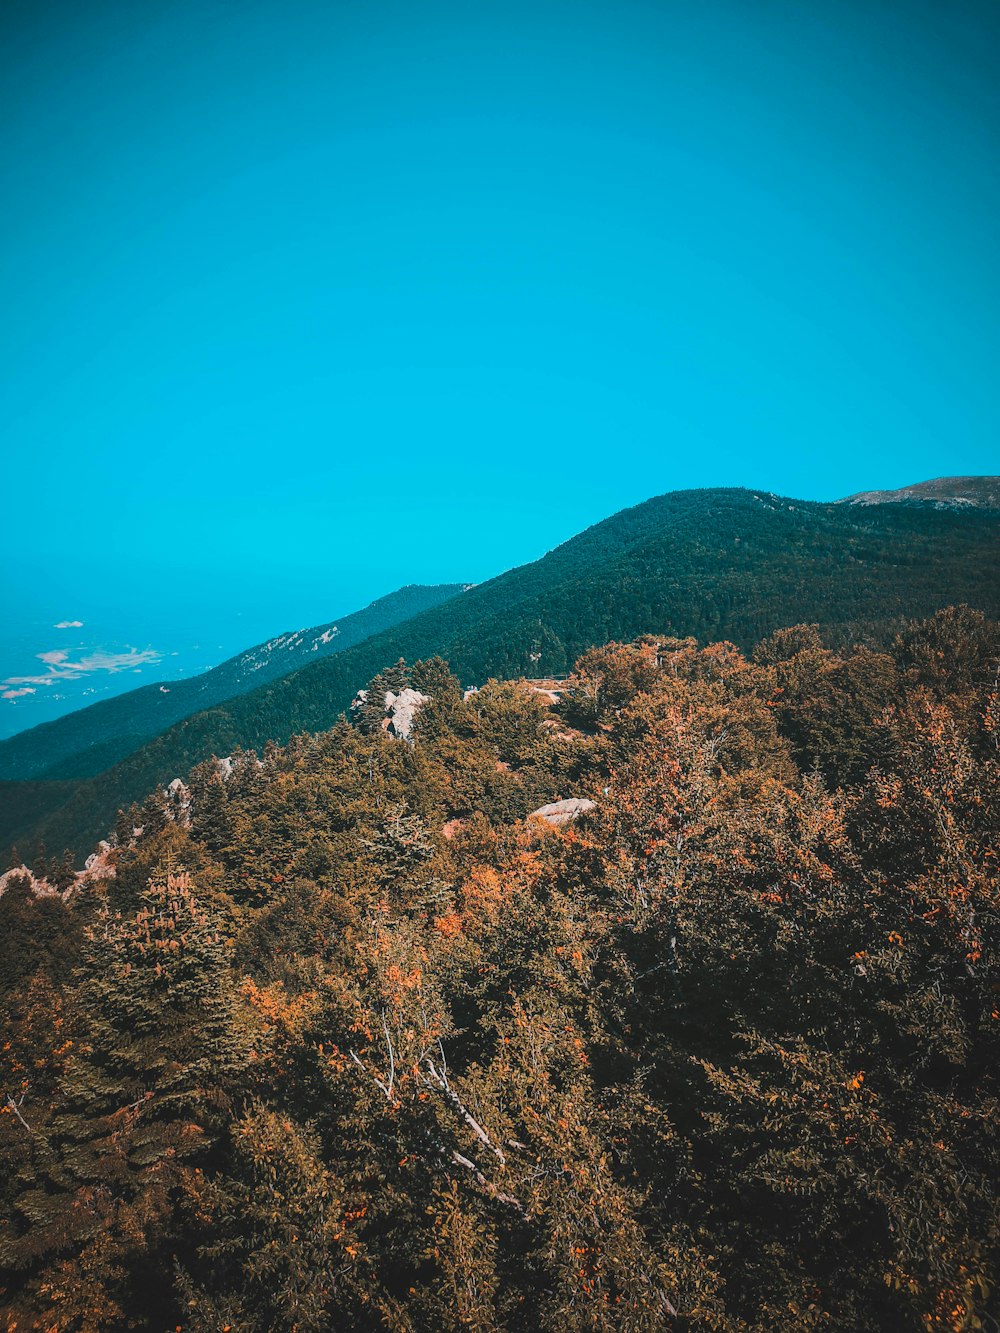 green and brown trees on mountain under blue sky during daytime